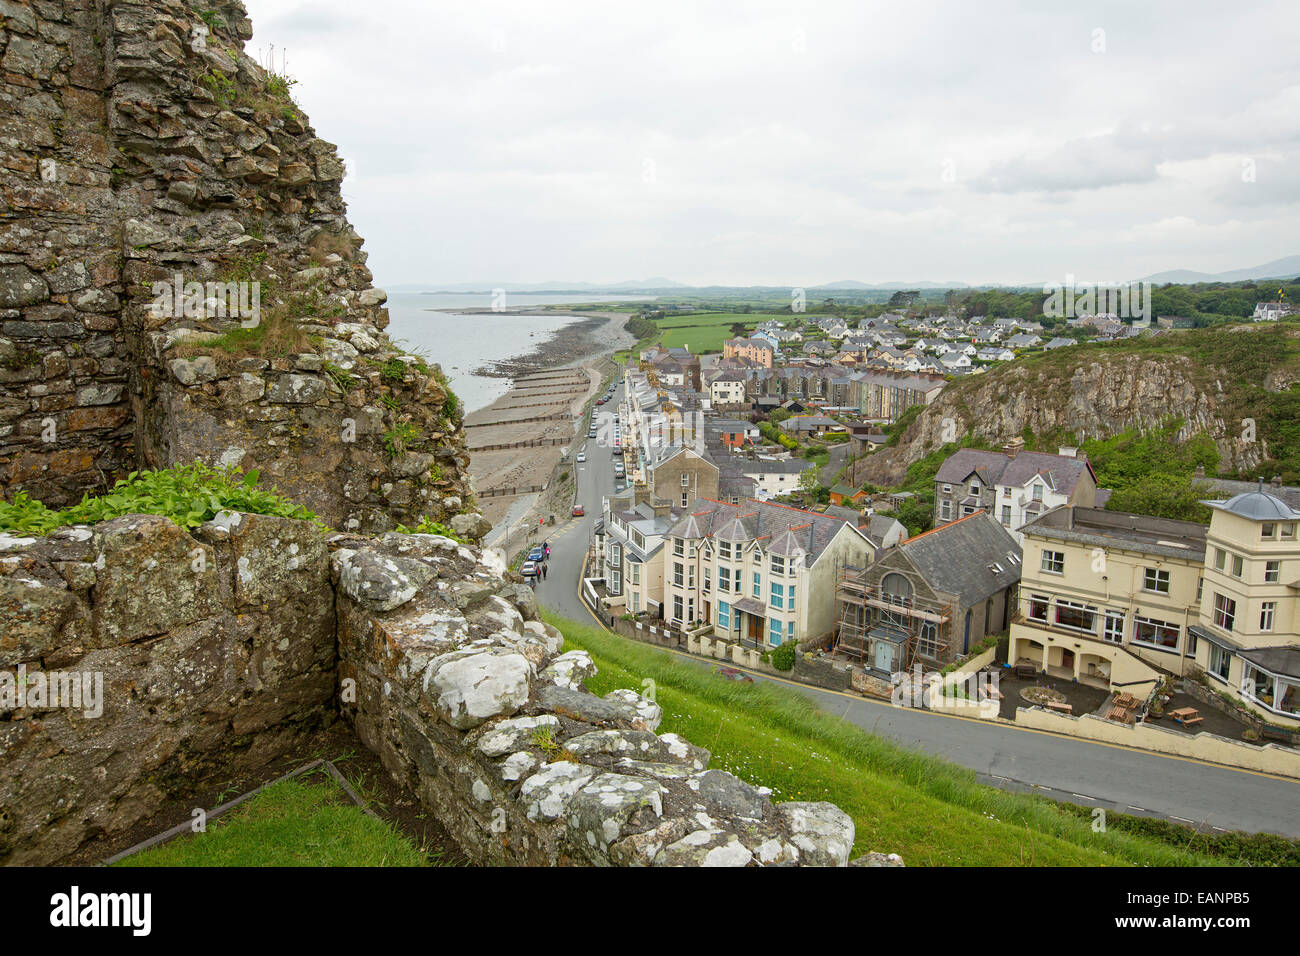 View, from hilltop castle, of historic Welsh town of Criccieth with row of houses by road bordering sandy beach of Cardigan Bay Stock Photo